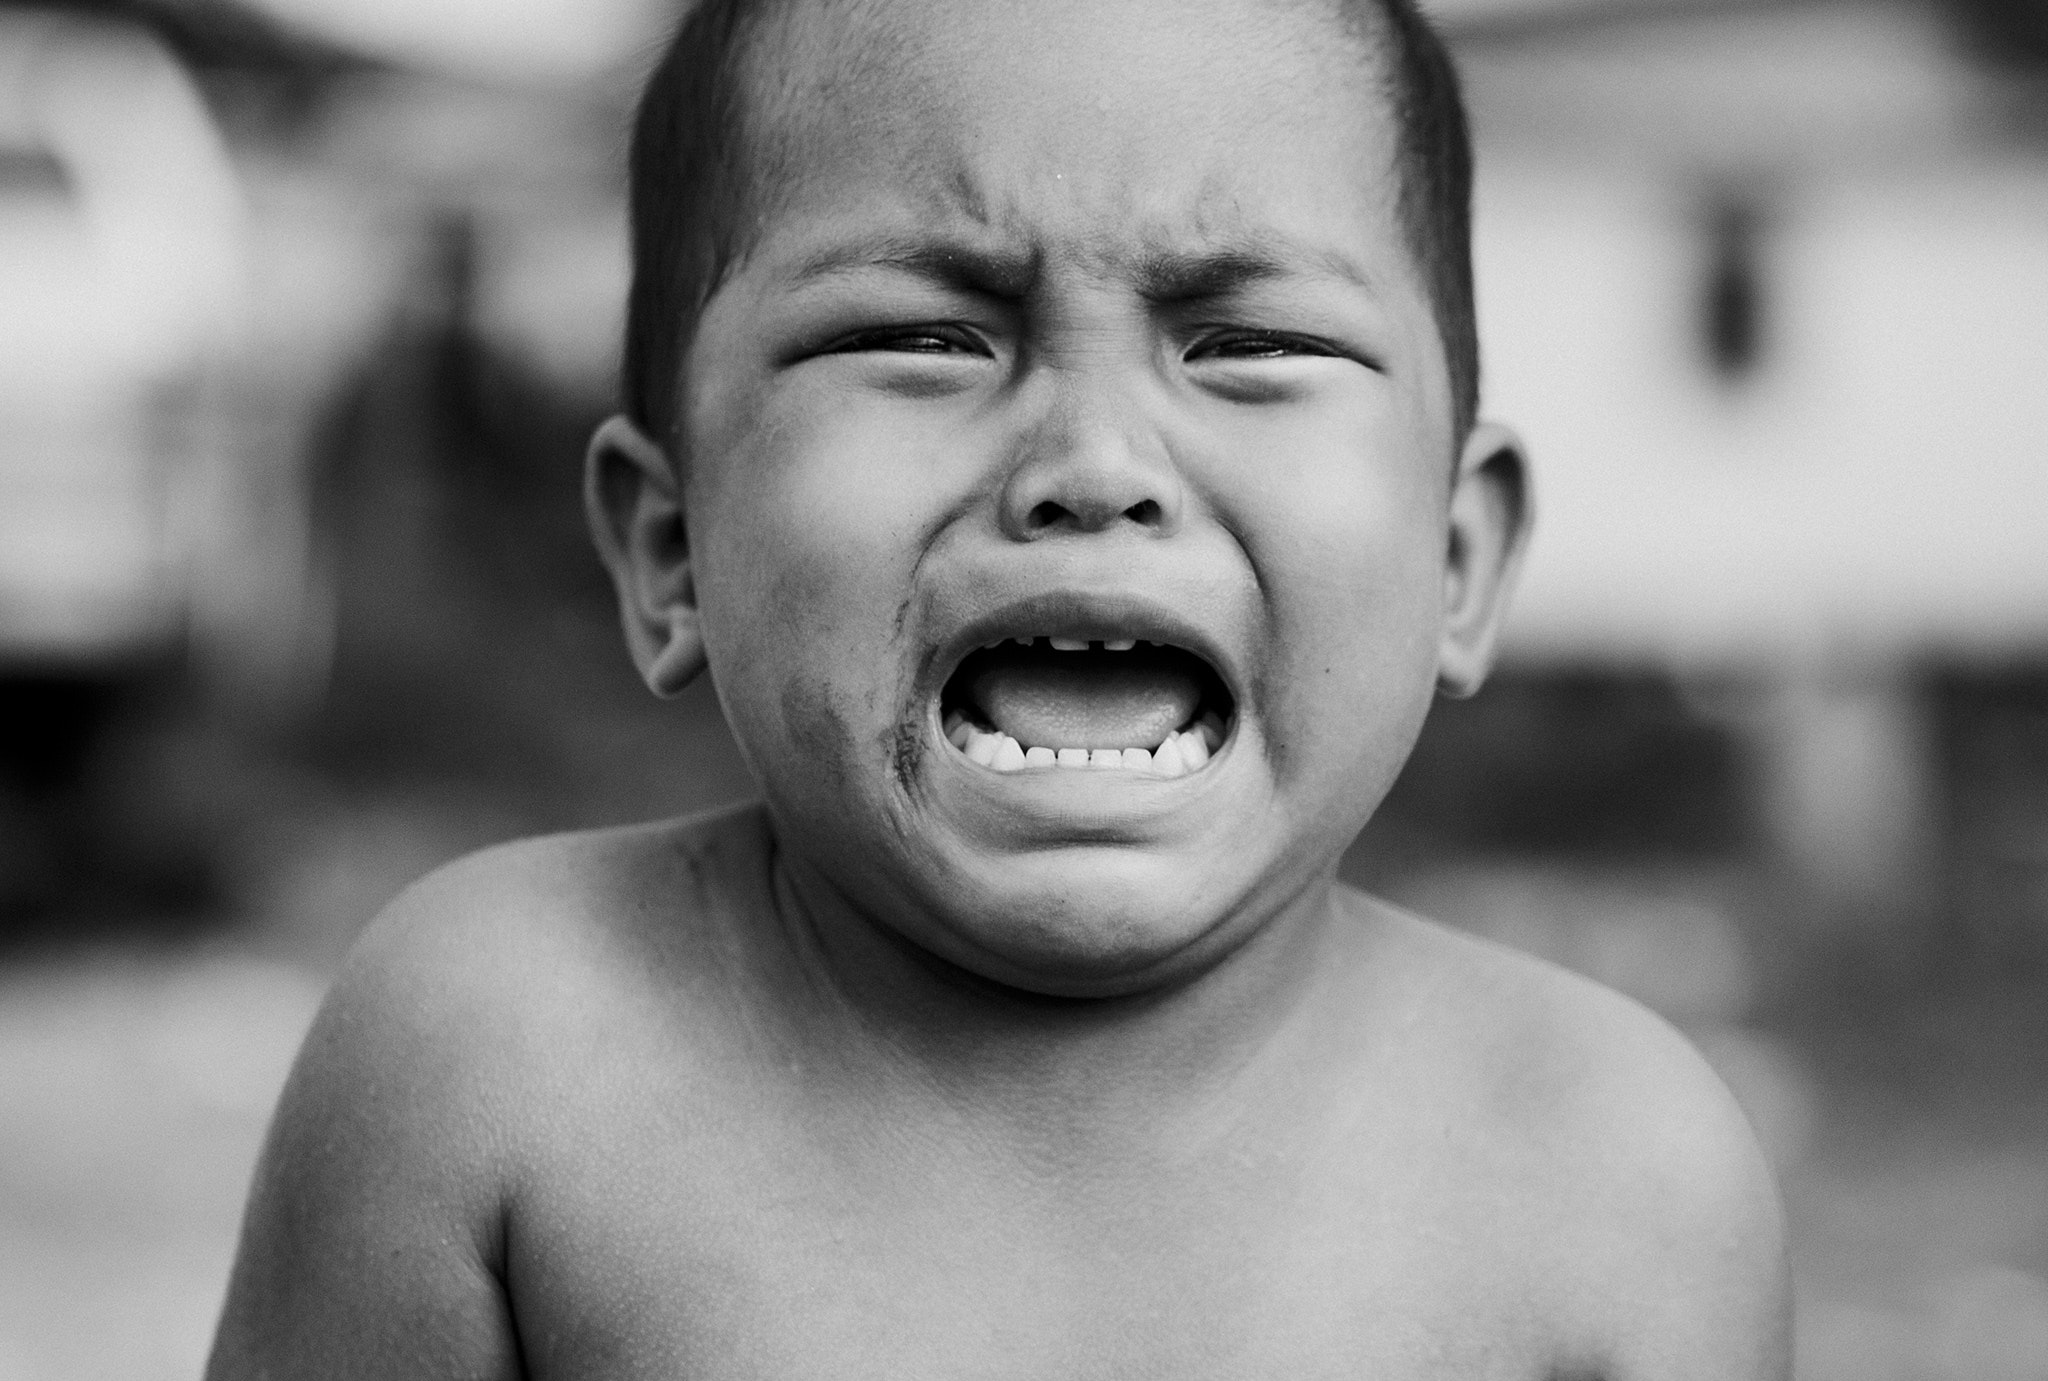 Gray Scale Photo of Crying Topless Boy, Black-and-white, Son, Smile, Shirtless, HQ Photo